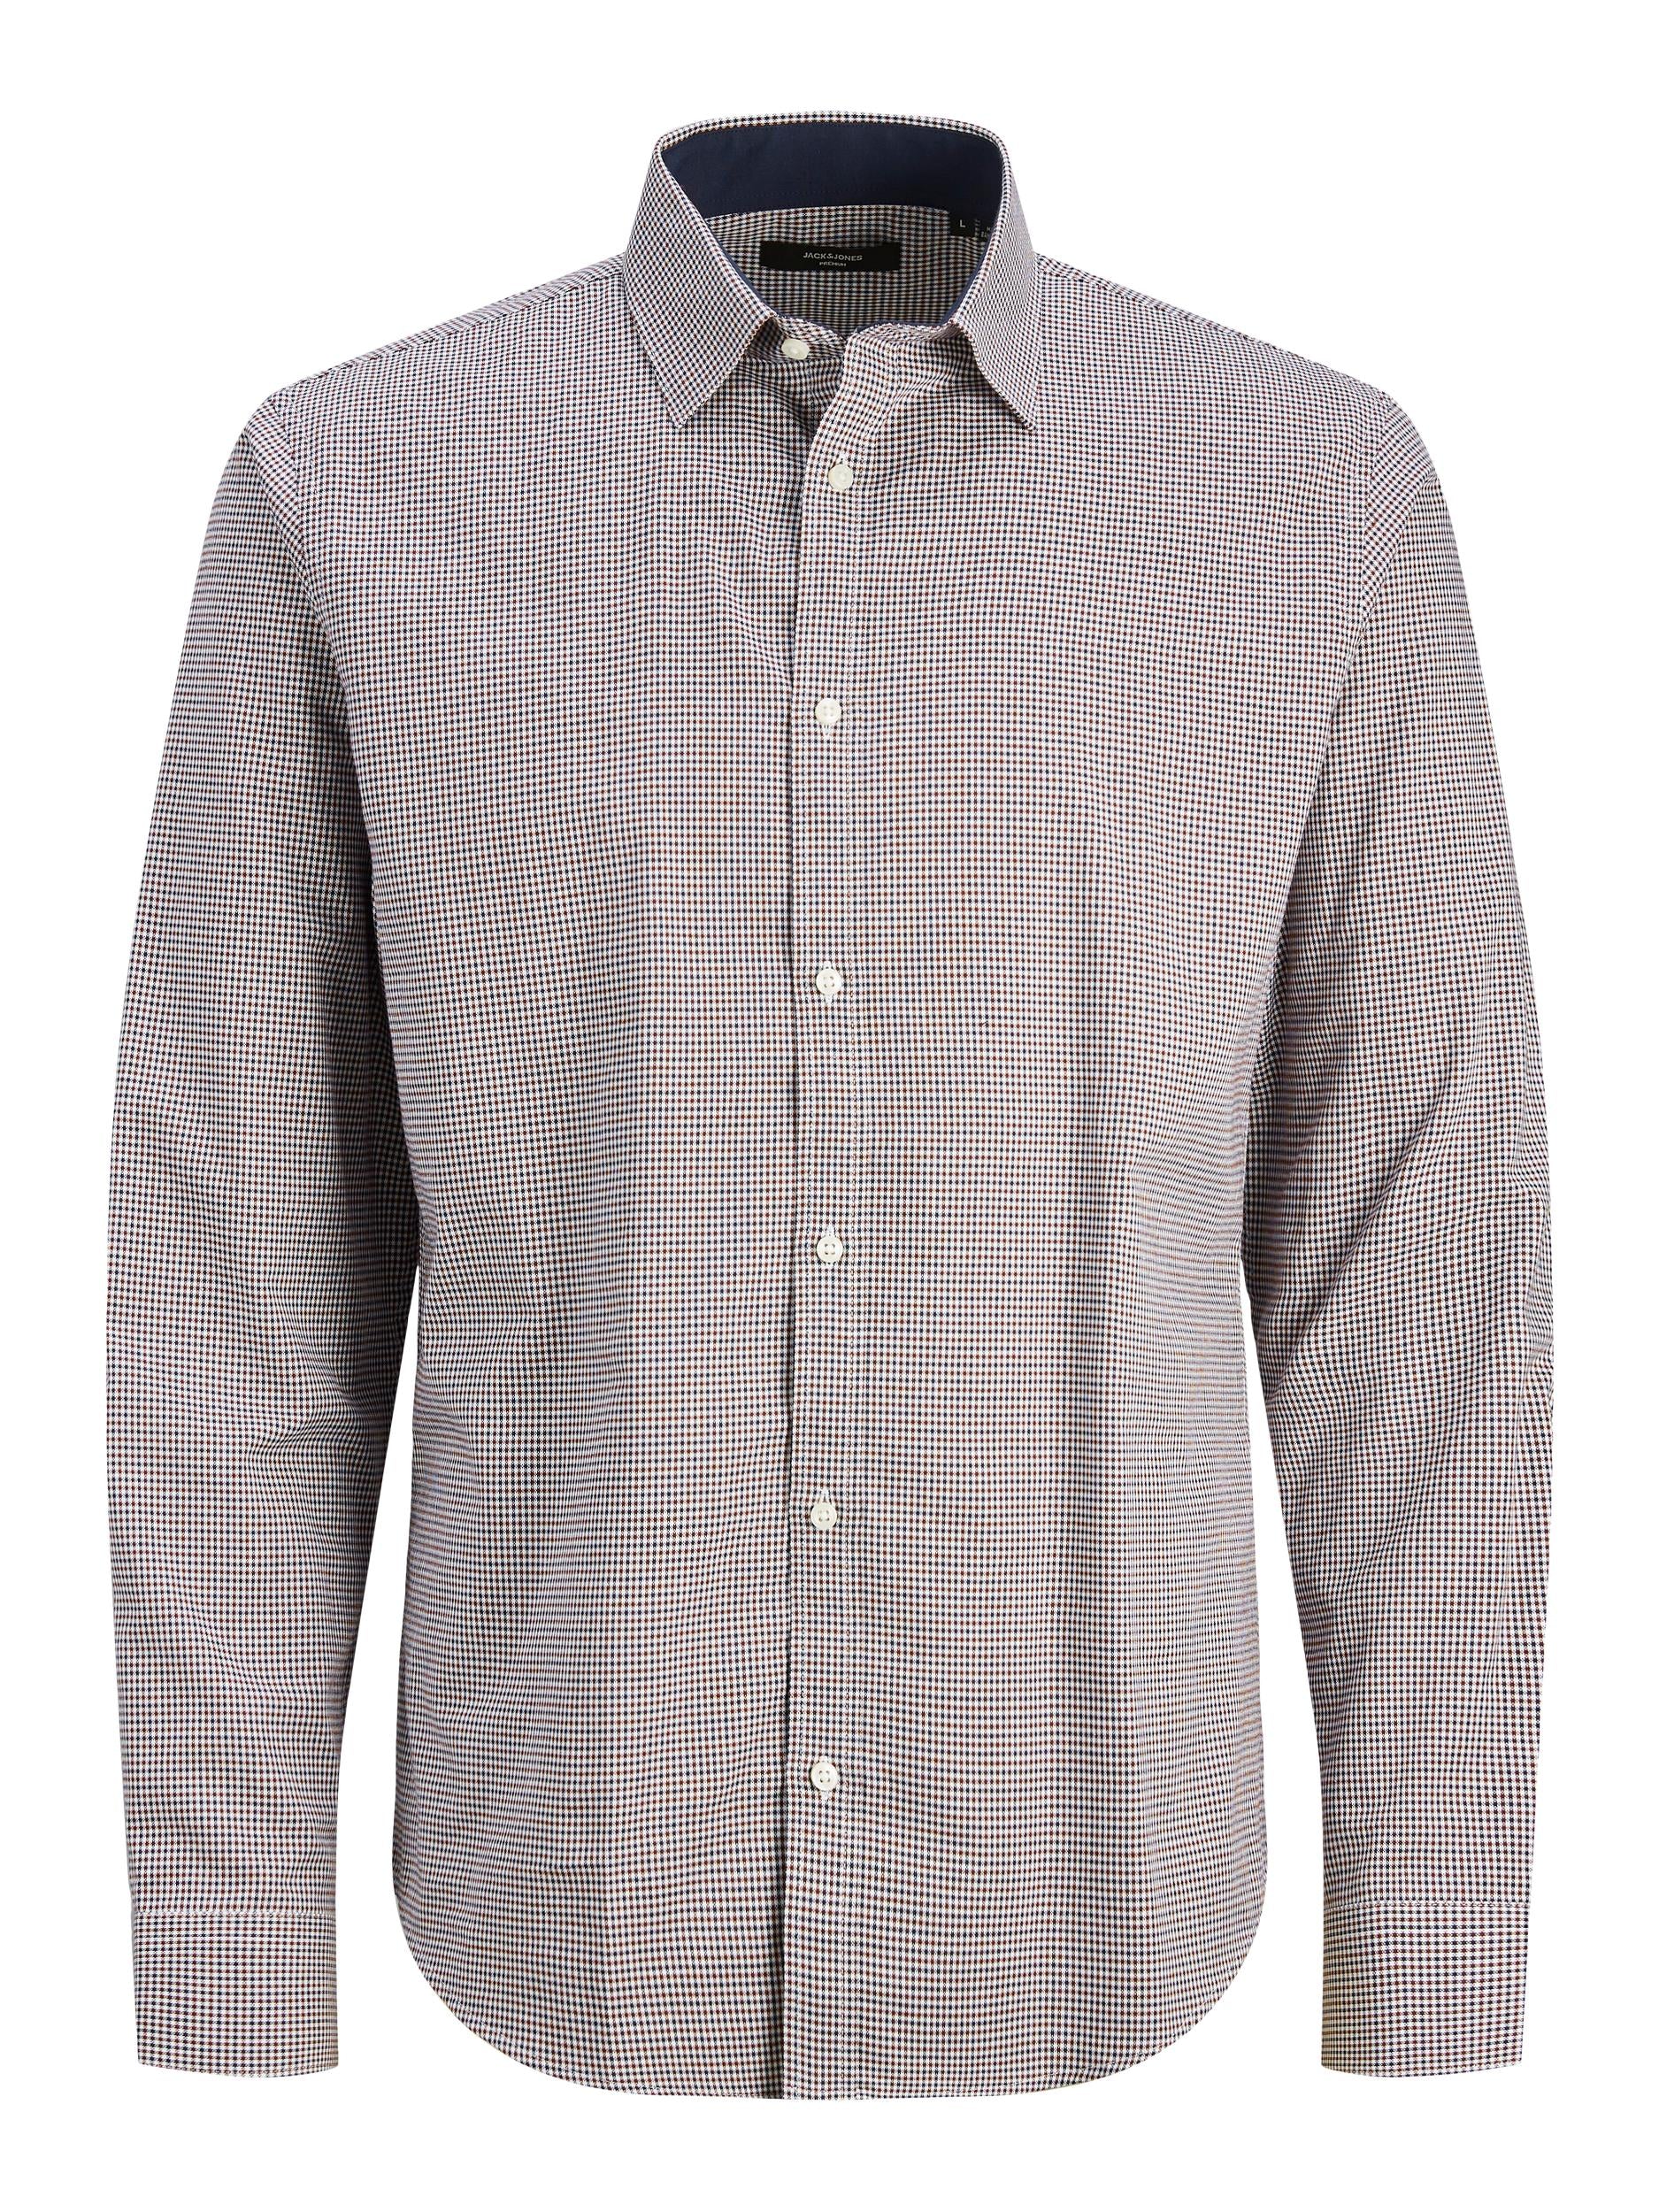 Men's Belfast Shirt Long Sleeve - Port Royale-Ghost Front View